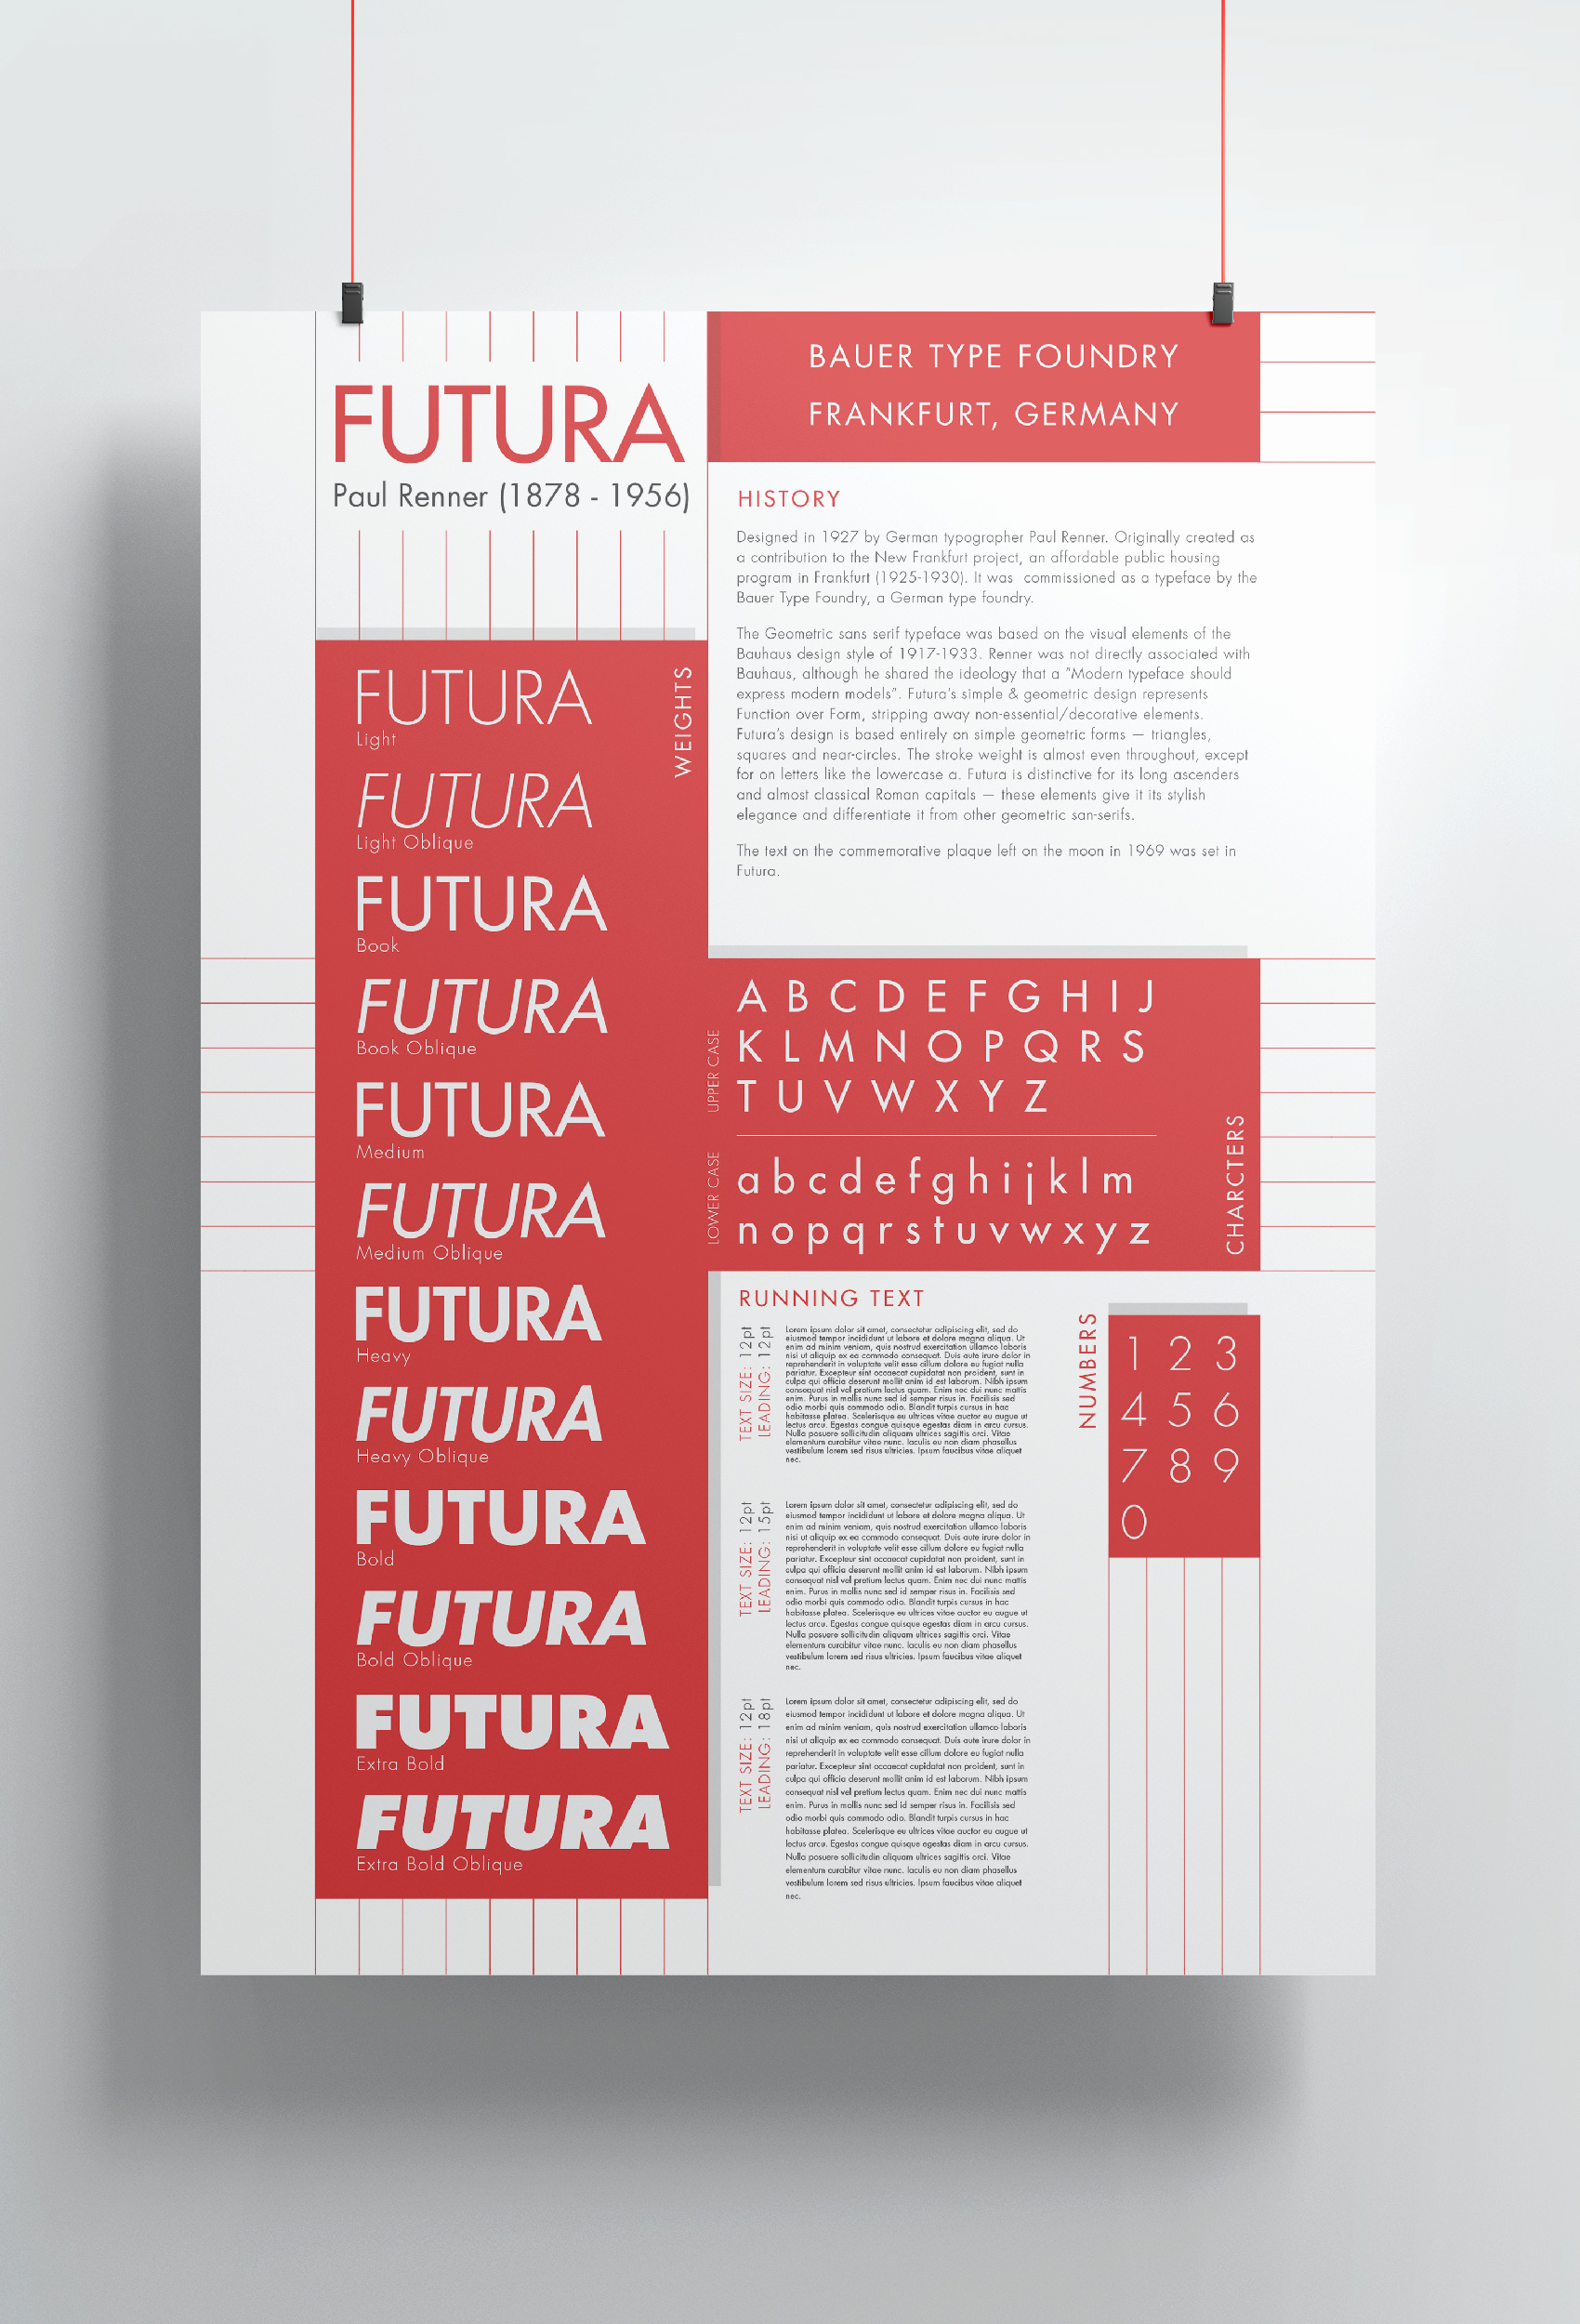 An image of Futura's typography poster design